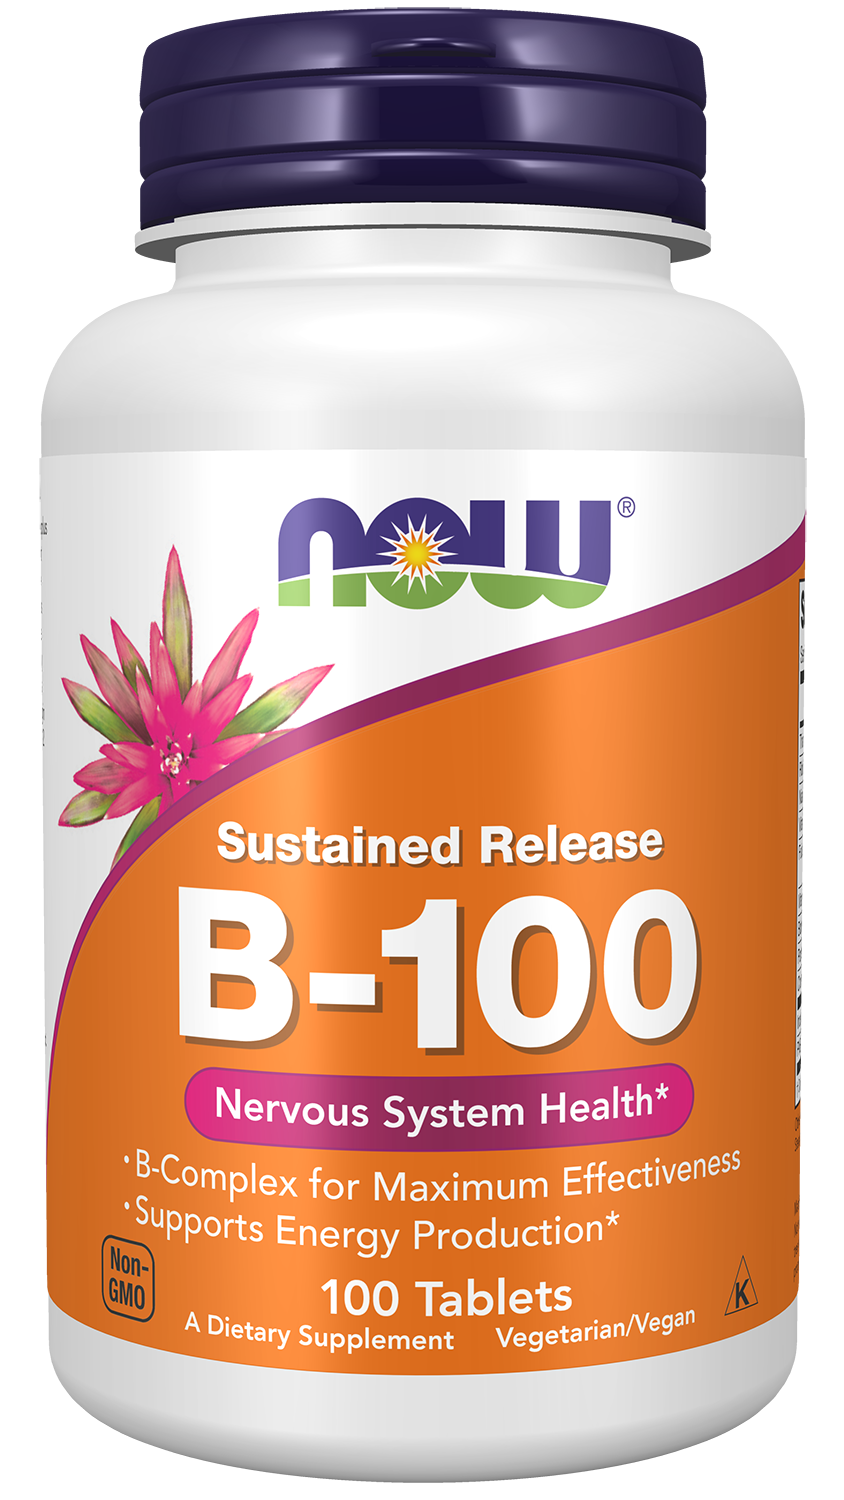 Vitamin B-100 Sustained Release - 100 Tablets Bottle Front